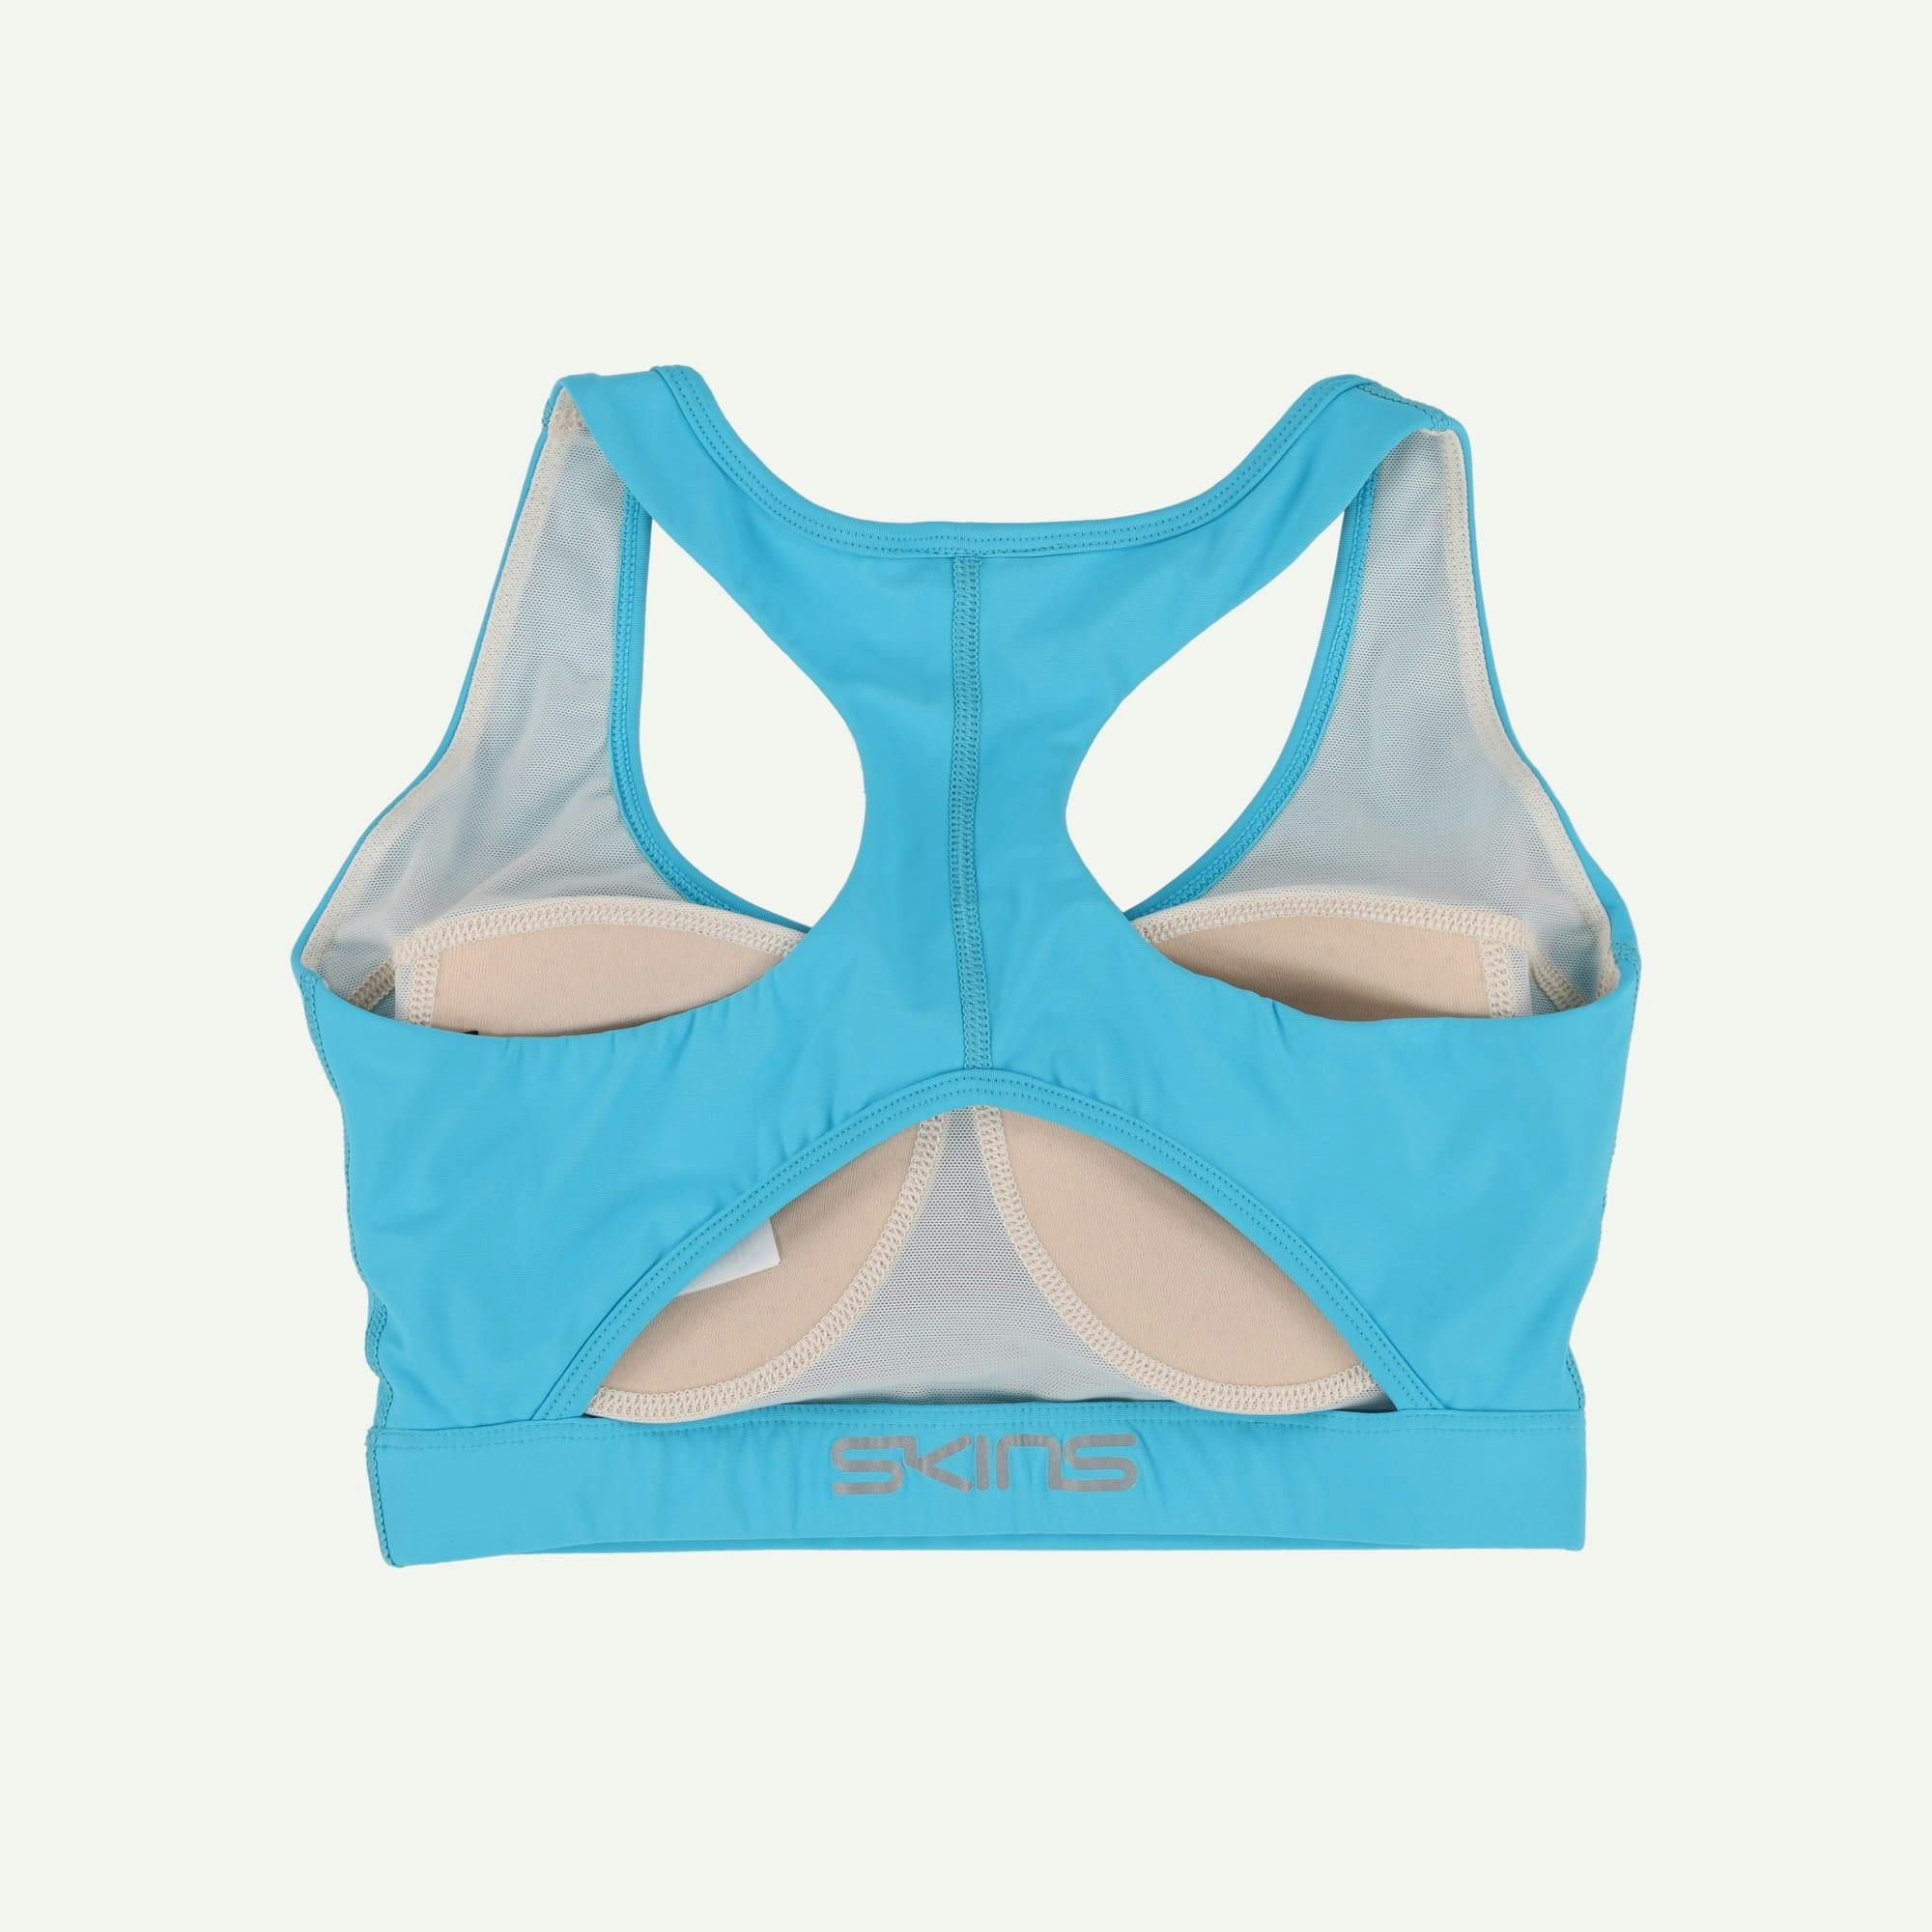 SKINS Compression As new Blue Series 3 Sports Bra